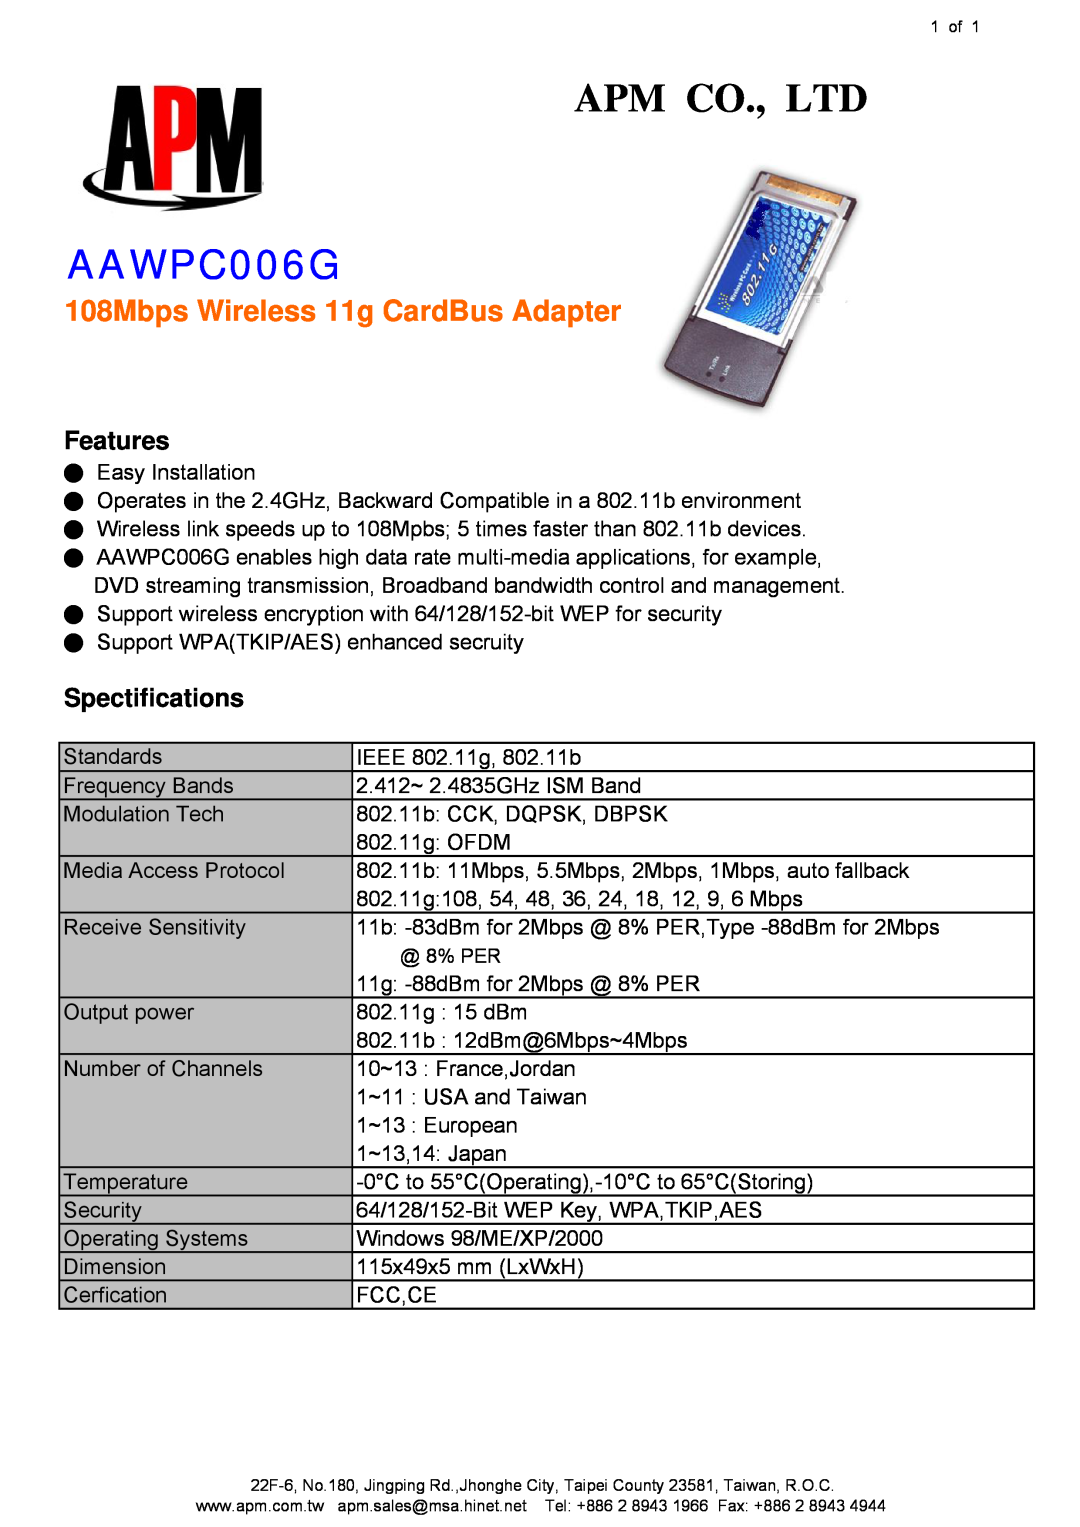 APM AAWPC006G manual 108Mbps Wireless 11g CardBus Adapter, Features, Spectifications 